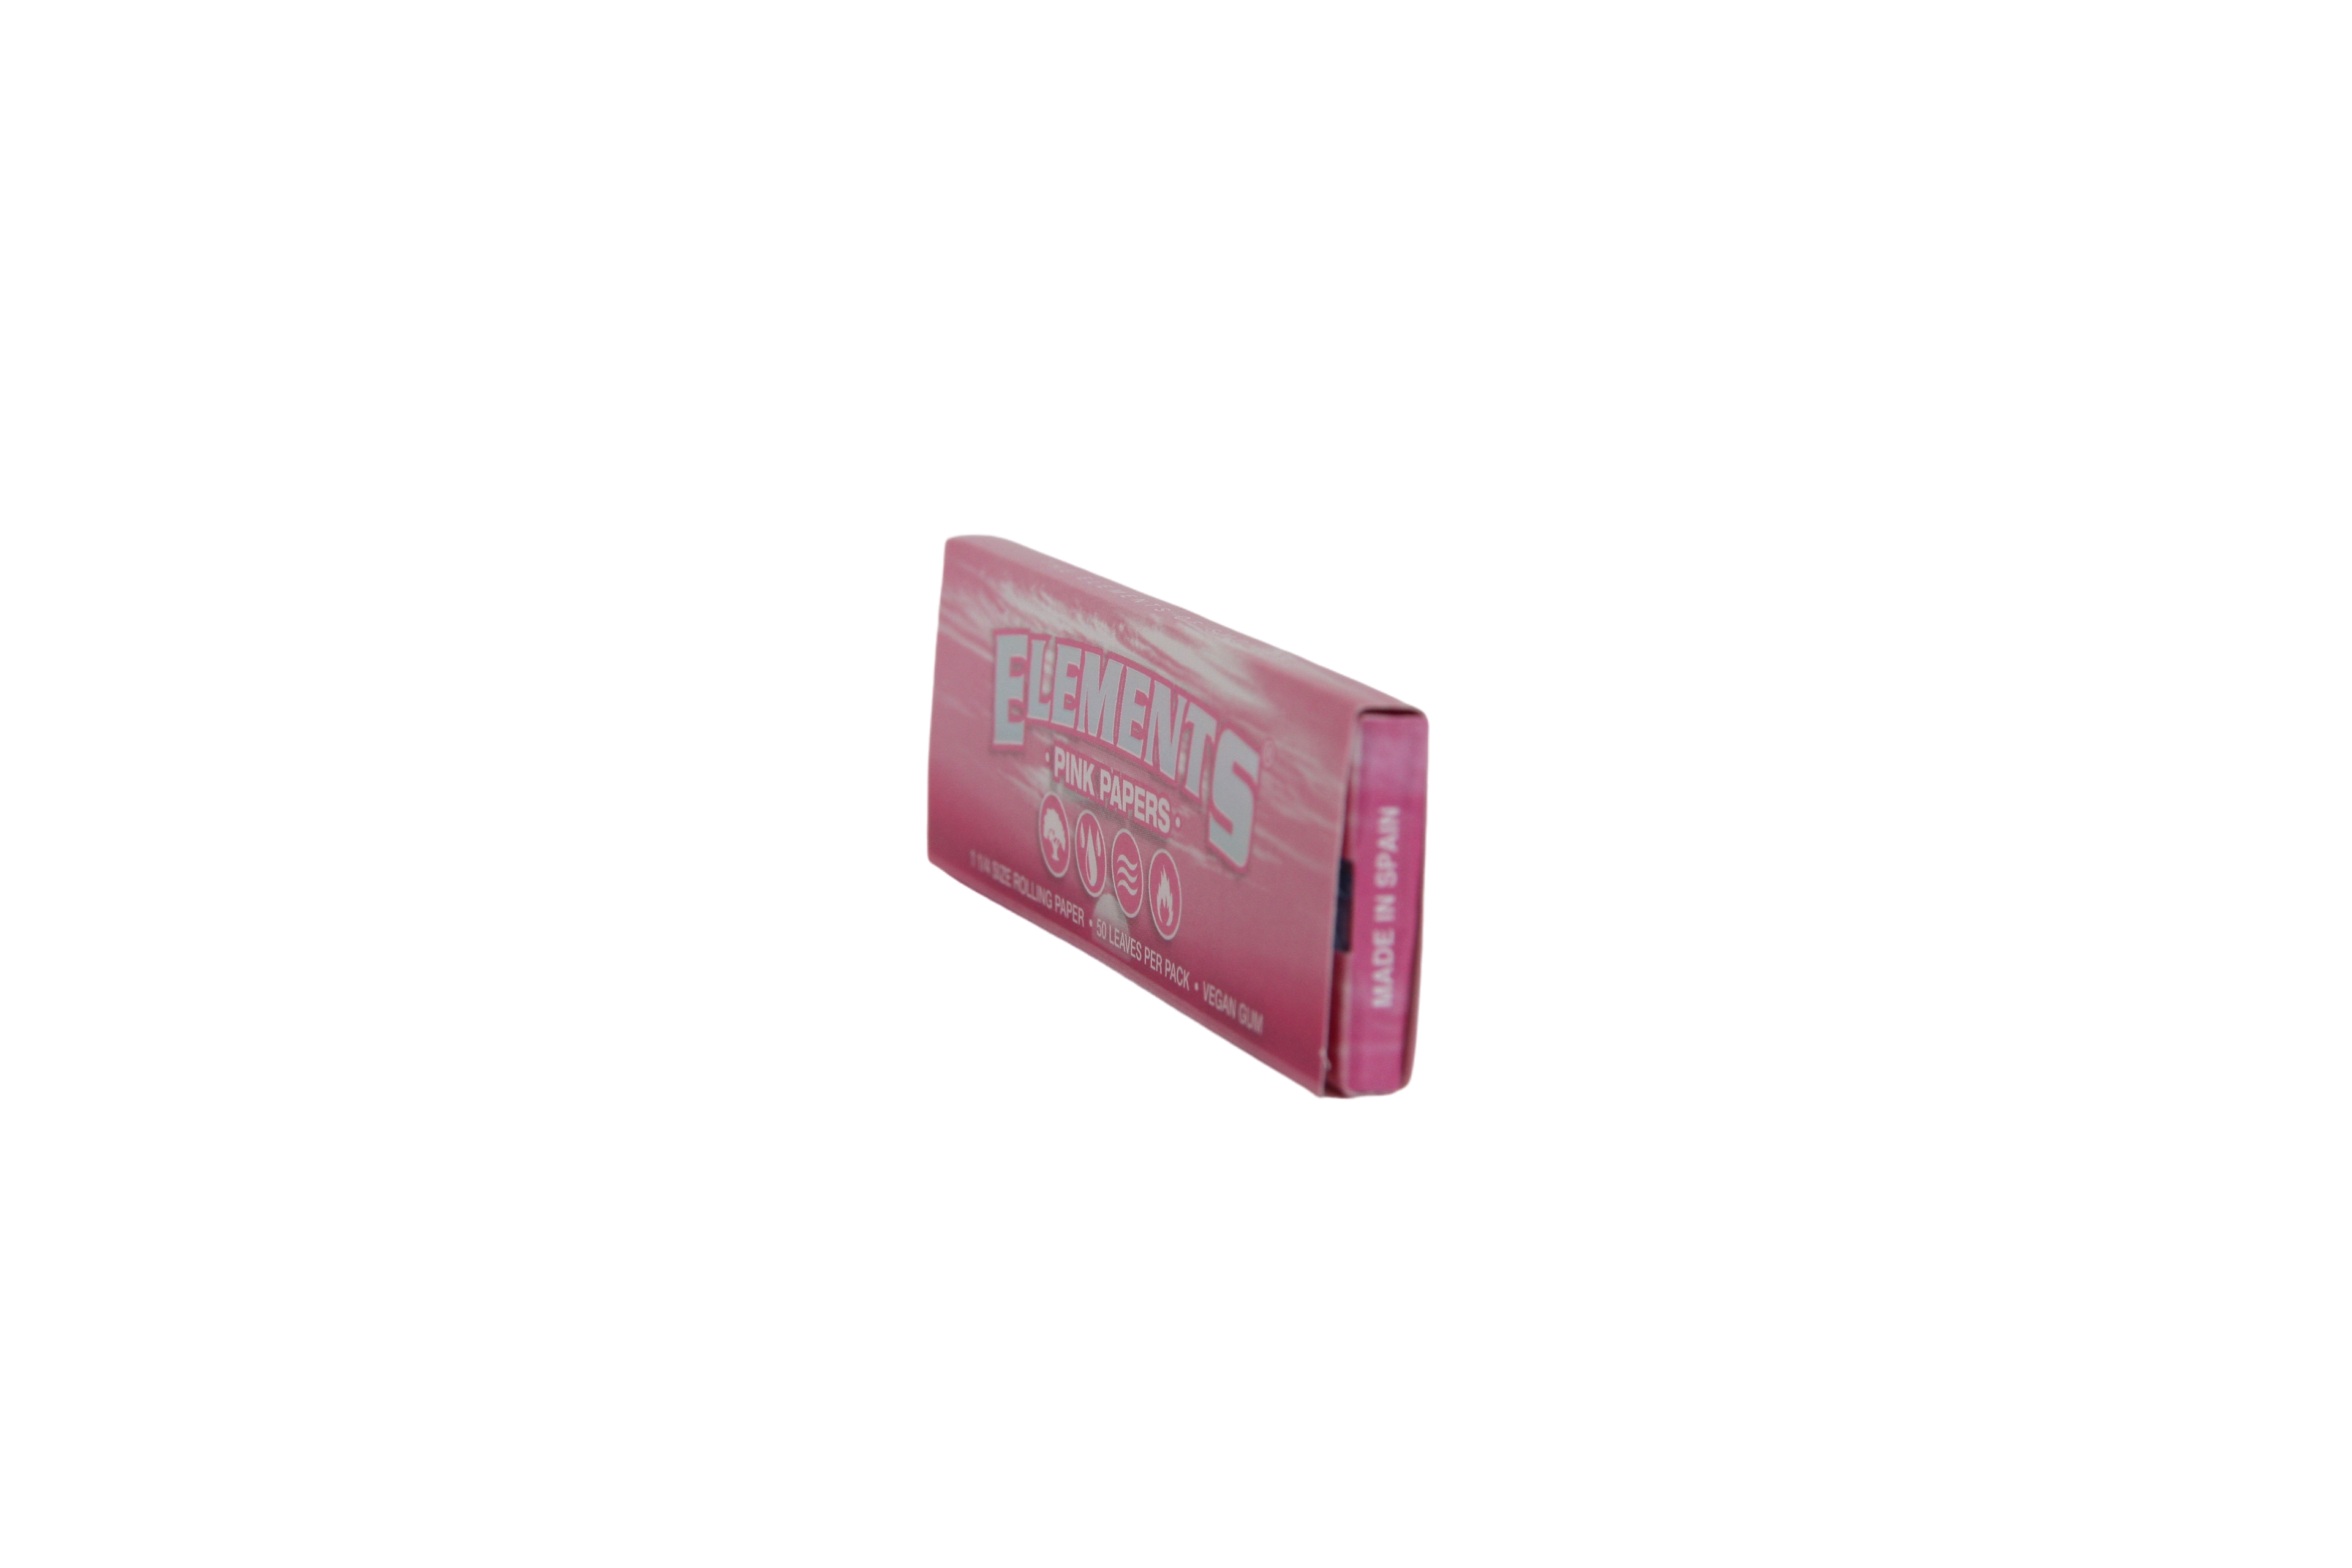 Elements Pink Papers - 1 1/4